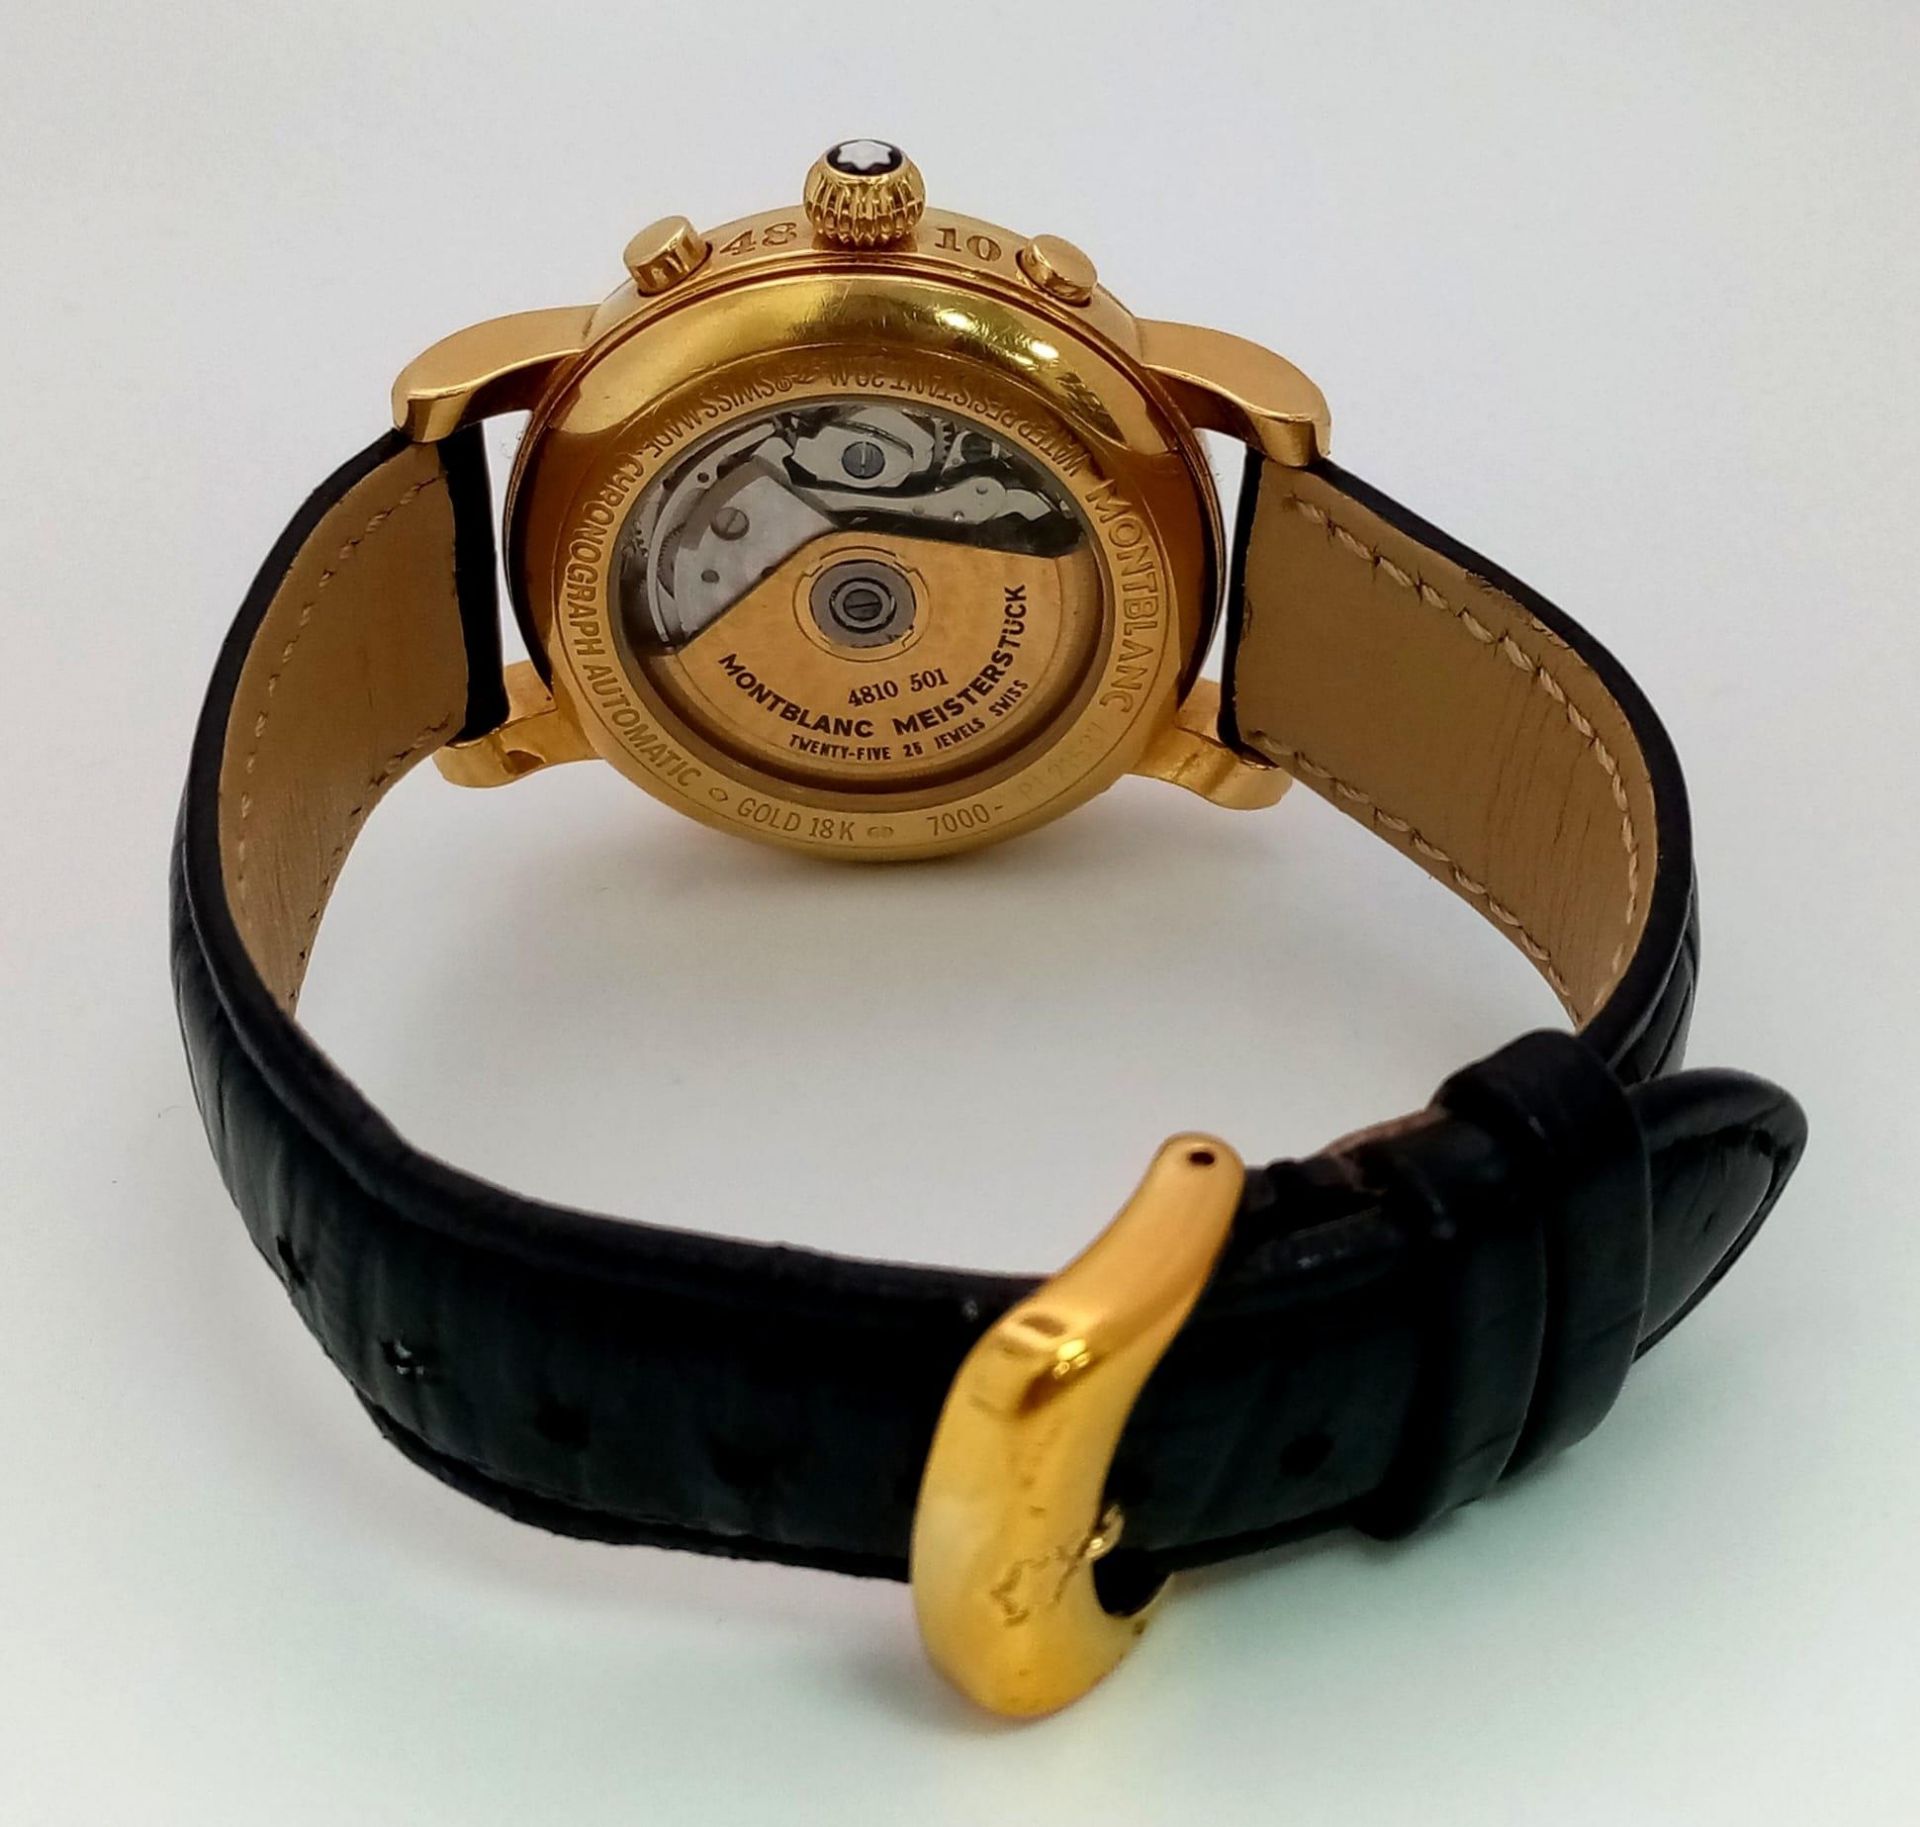 A Montblanc 18K Gold Meisterstuck 4810 Automatic Gents Watch. Black leather strap. 18k gold case - - Image 22 of 23